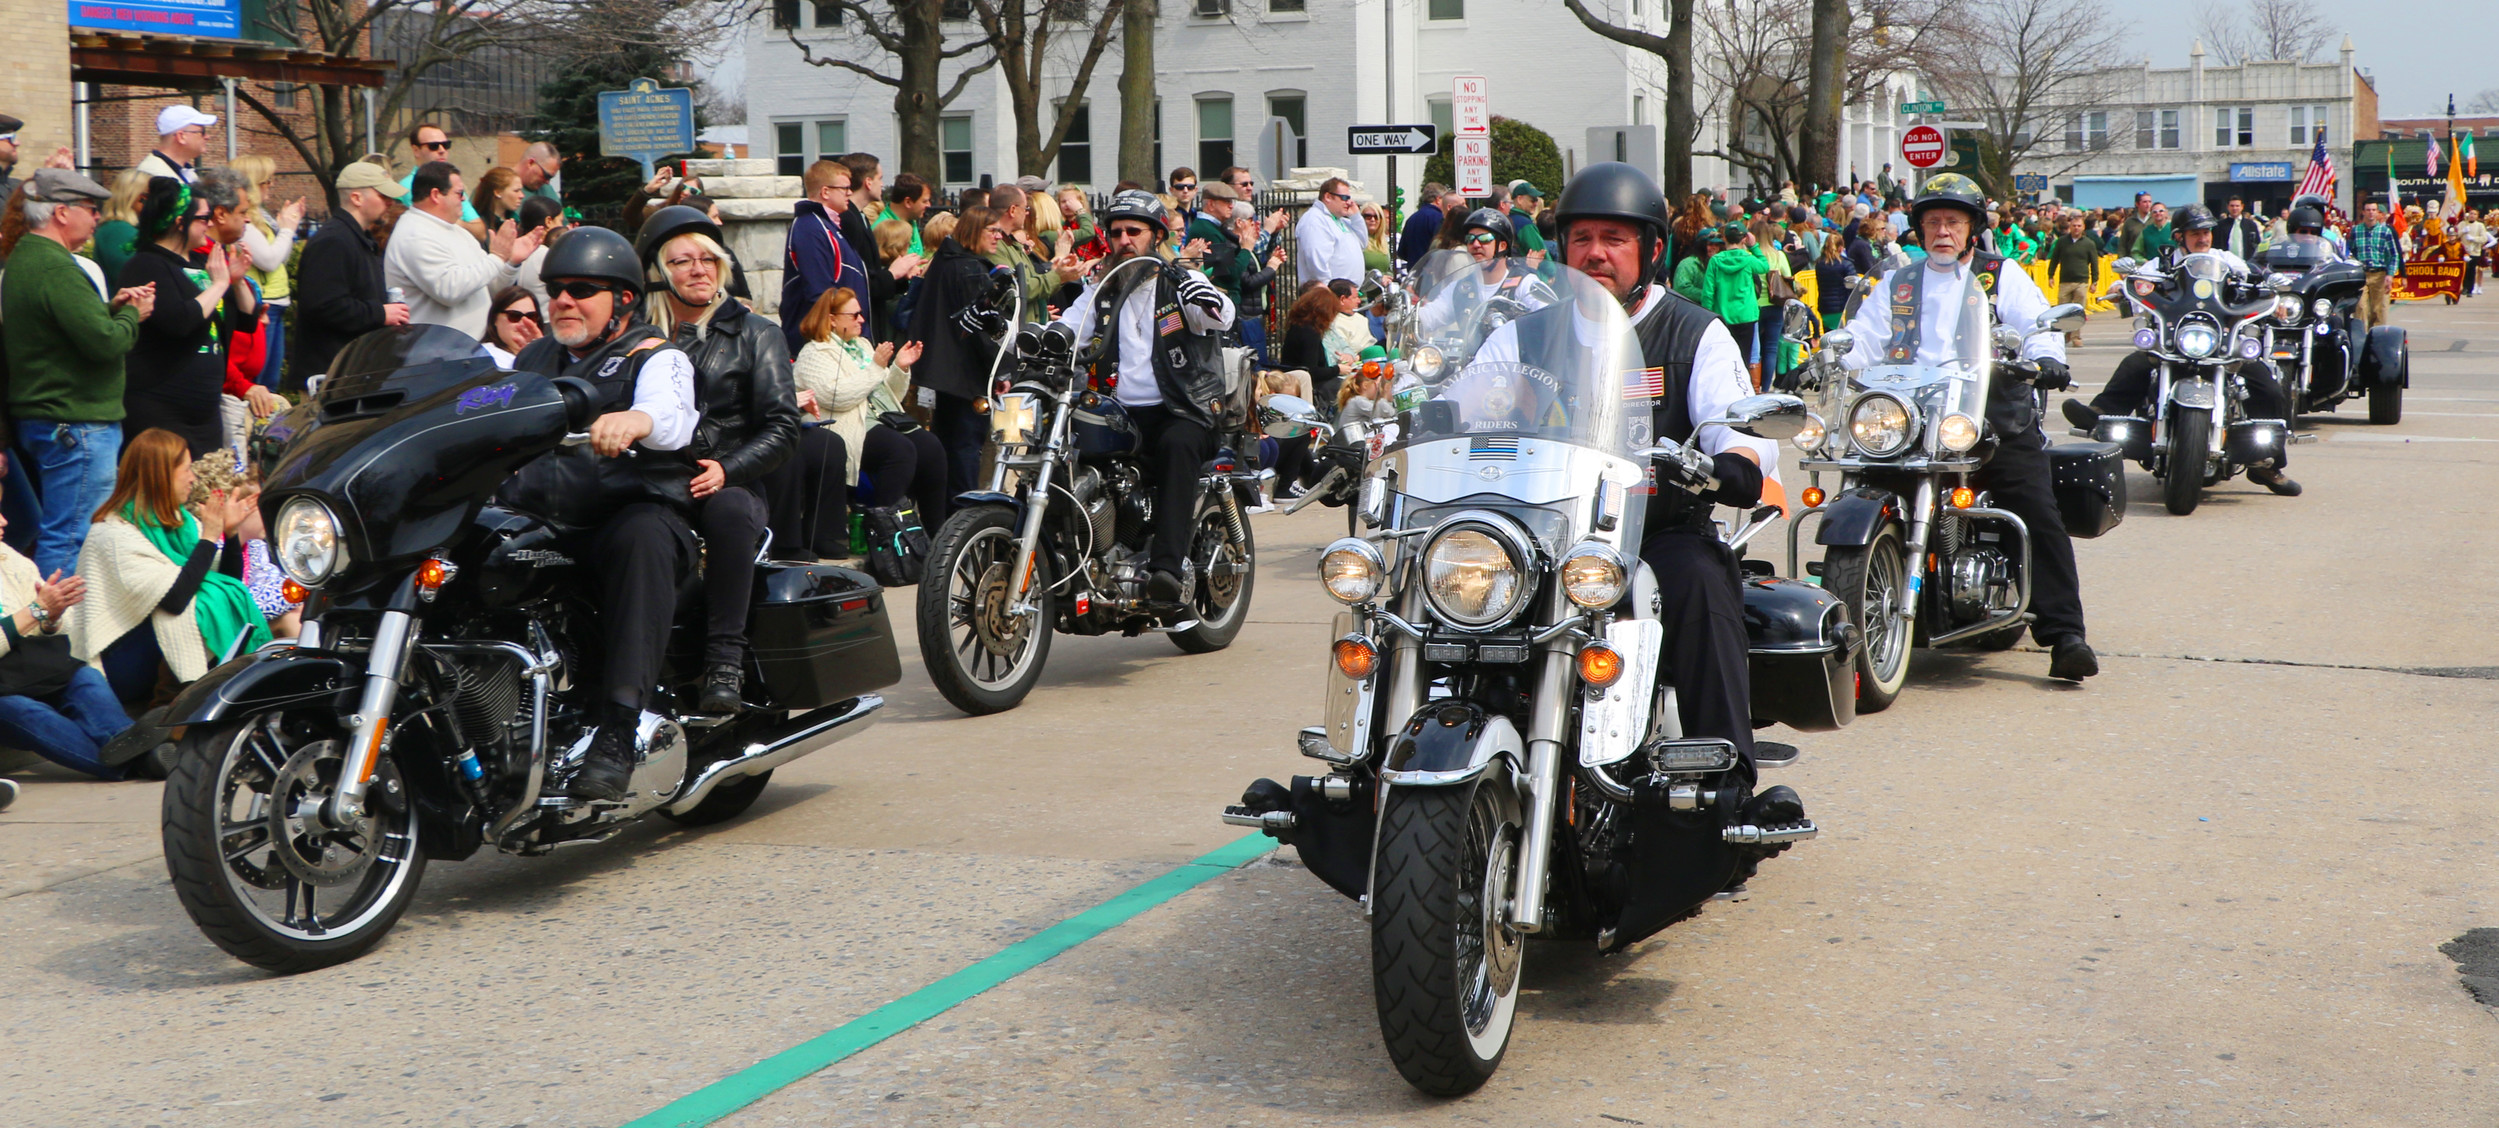 Various members of the American Legion ride together on their motorcycles.